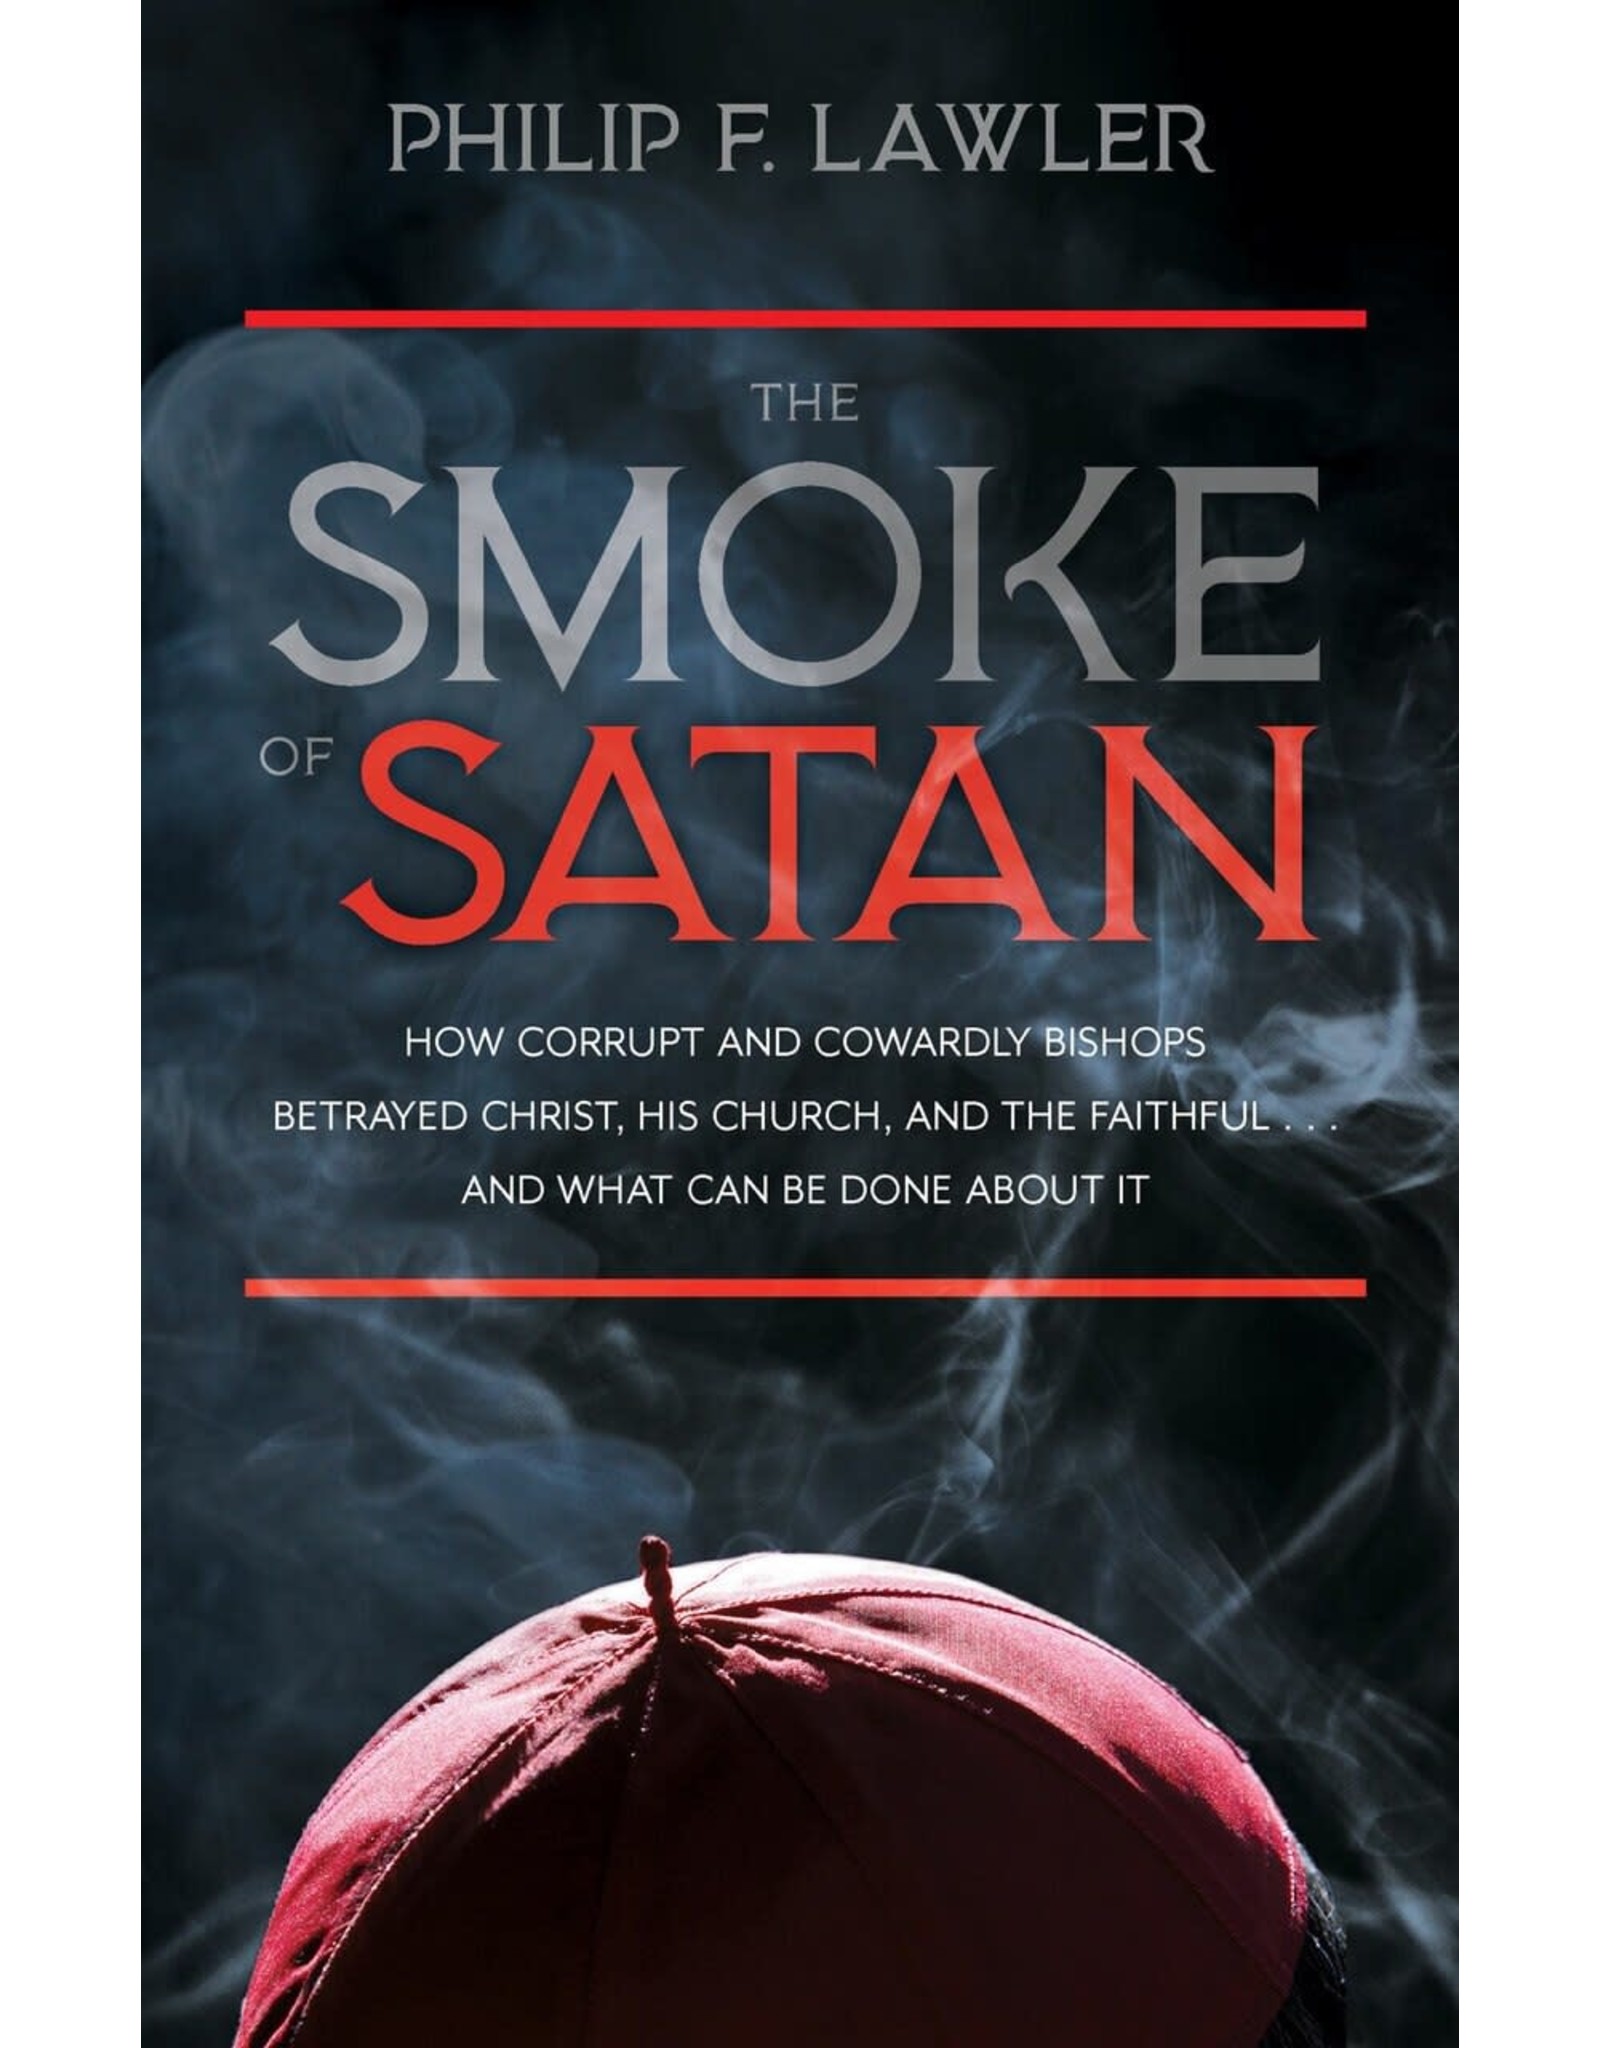 Tan Books The Smoke Of Satan: How Corrupt And Cowardly Bishops Betrayed Christ, His Church, And The Faithful And What Can Be Done About It by Philip F. Lawler (Paperback)